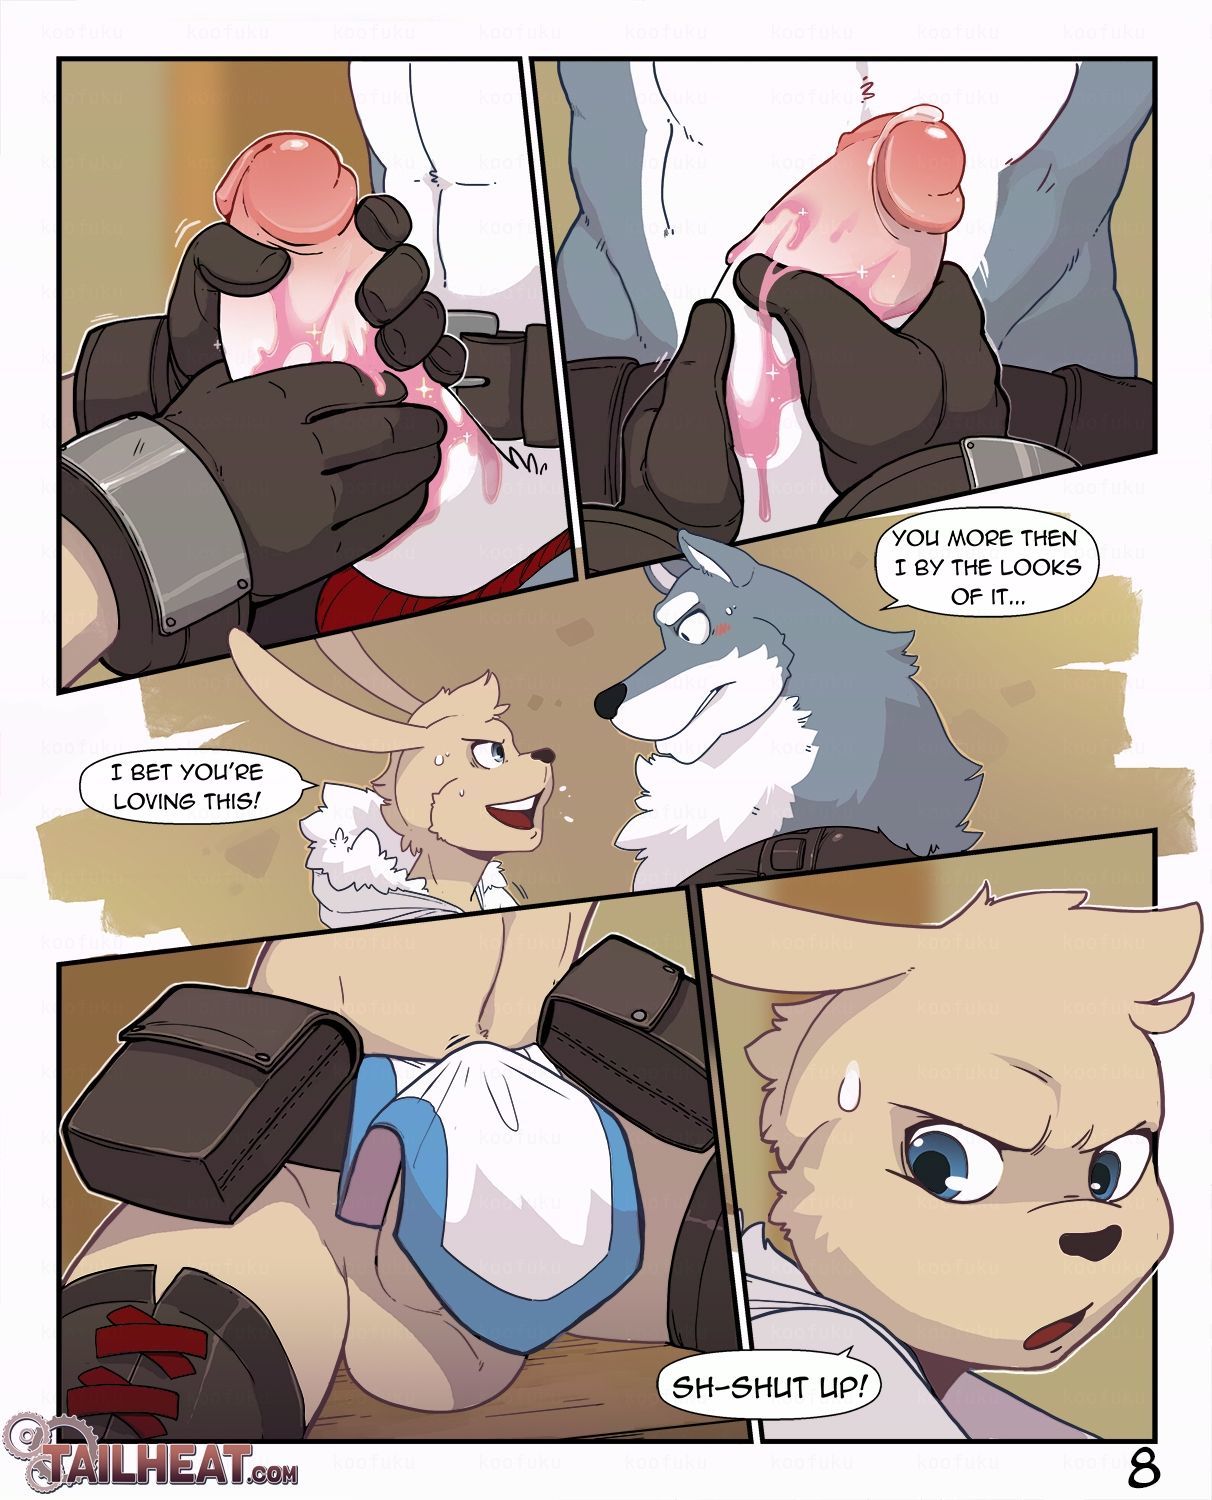 Worg Chapter 1 - Predickament page 8